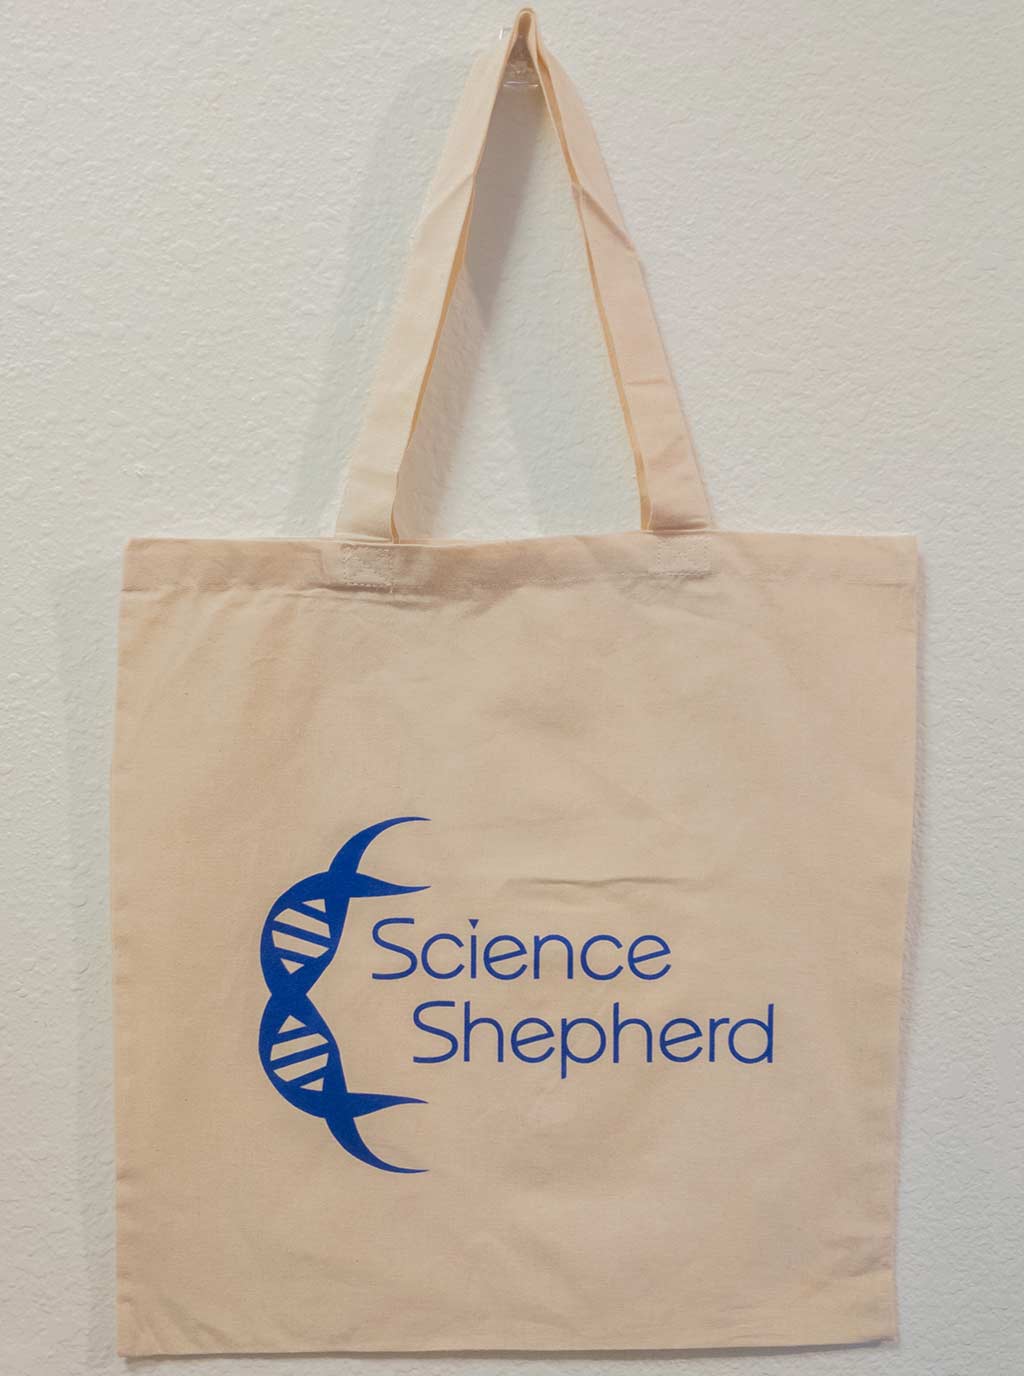 Creme colored homeschool curriculum tote with blue Science Shepherd logo